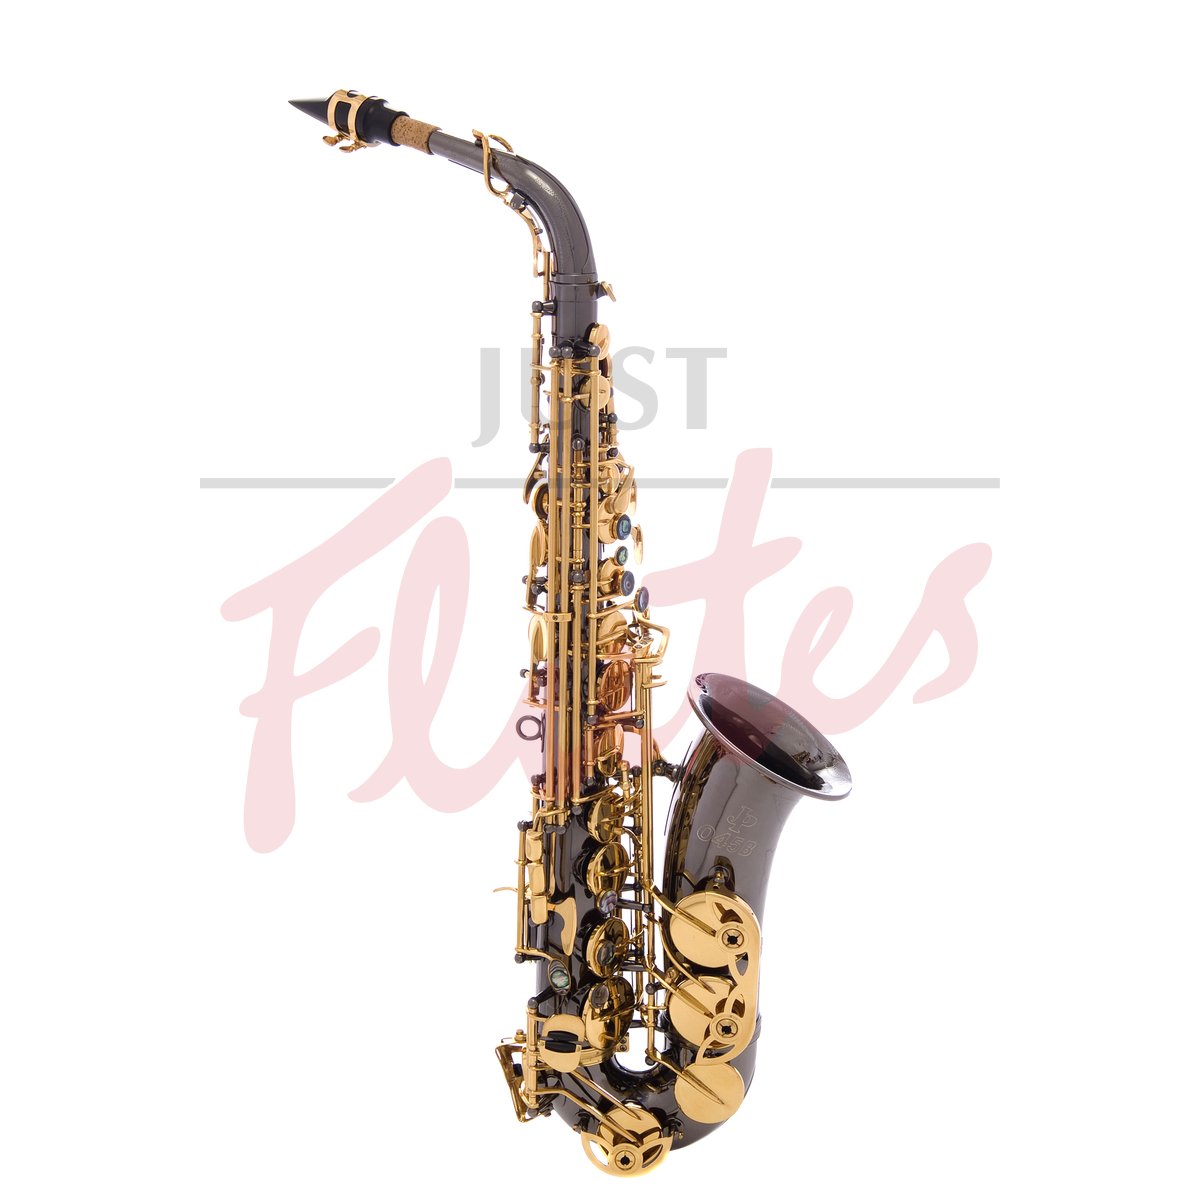 JP045B Alto Saxophone, Black Lacquer with Gold Plated Keys